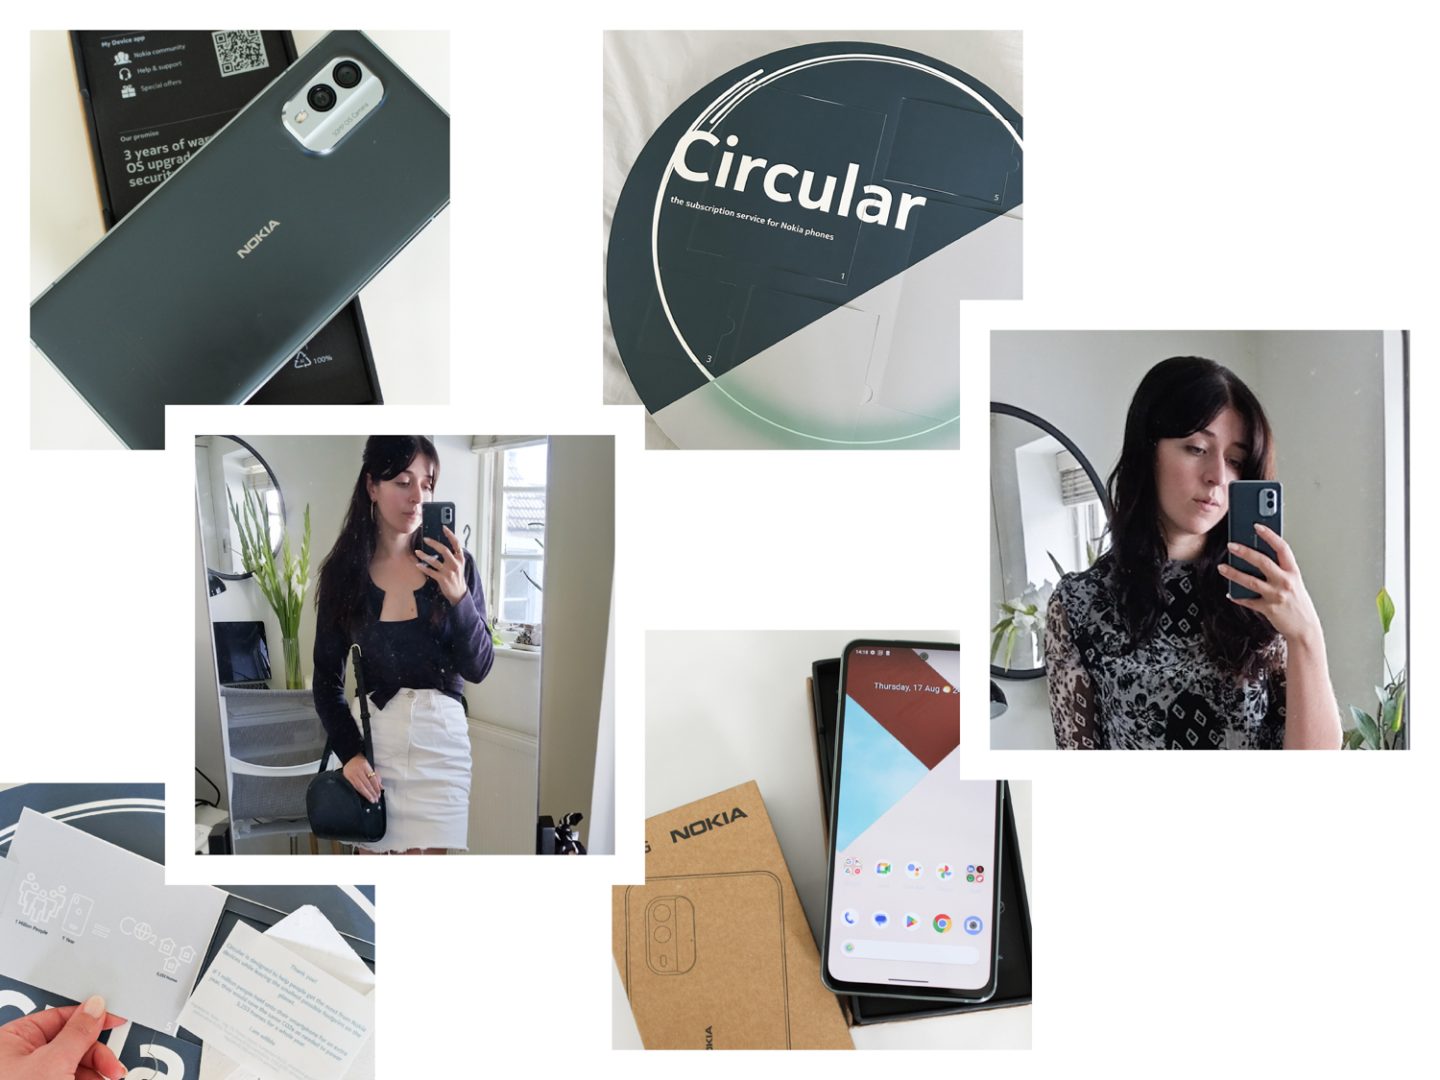 Collage of images showing Besma reviewing Nokia Circular eco phone subscription service